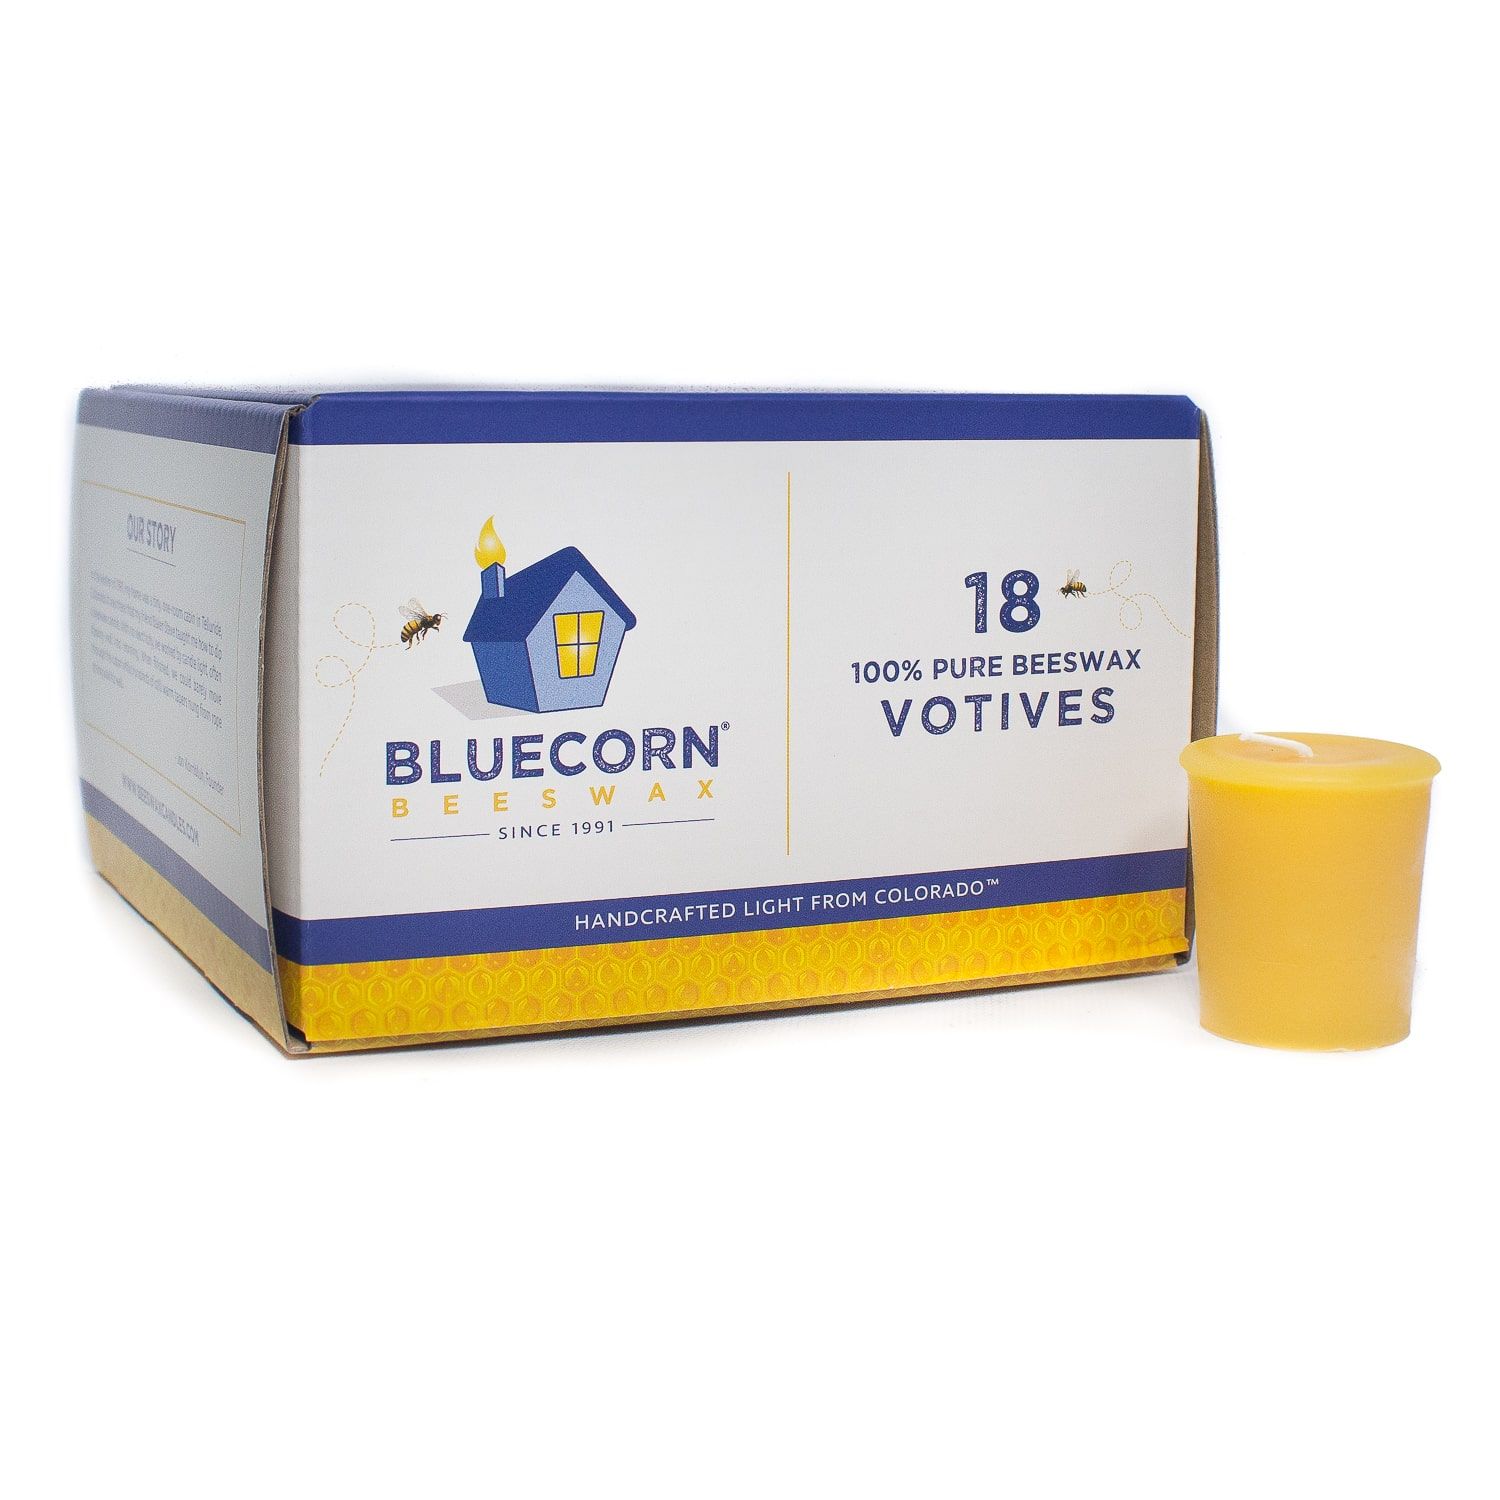 Bluecorn Beeswax Custom Mailer Boxes for Candles